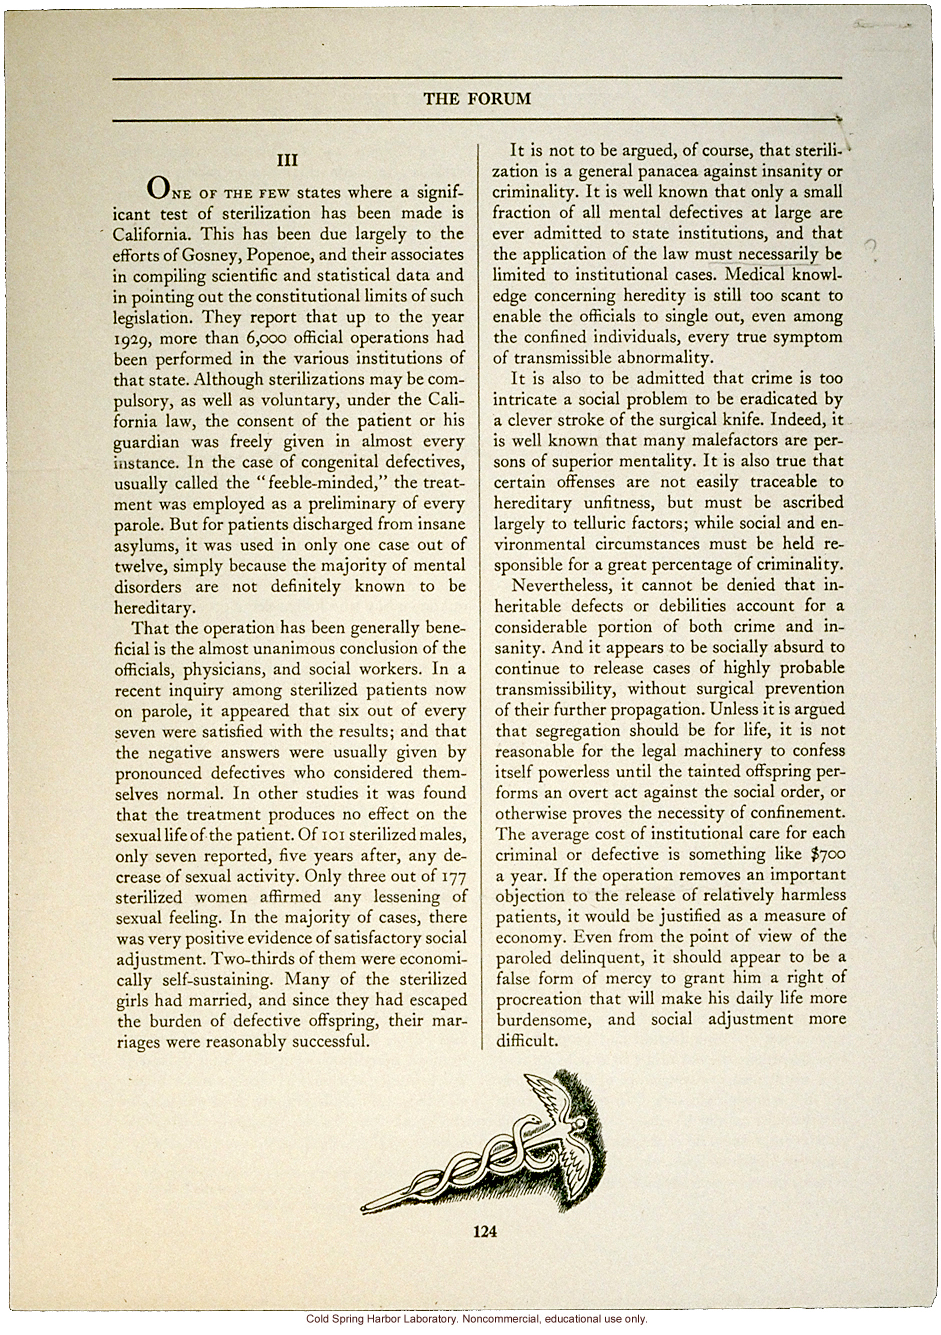 &quote;Sterilization of the Unfit&quote; by Anthony M. Turano, Forum (February 1934)